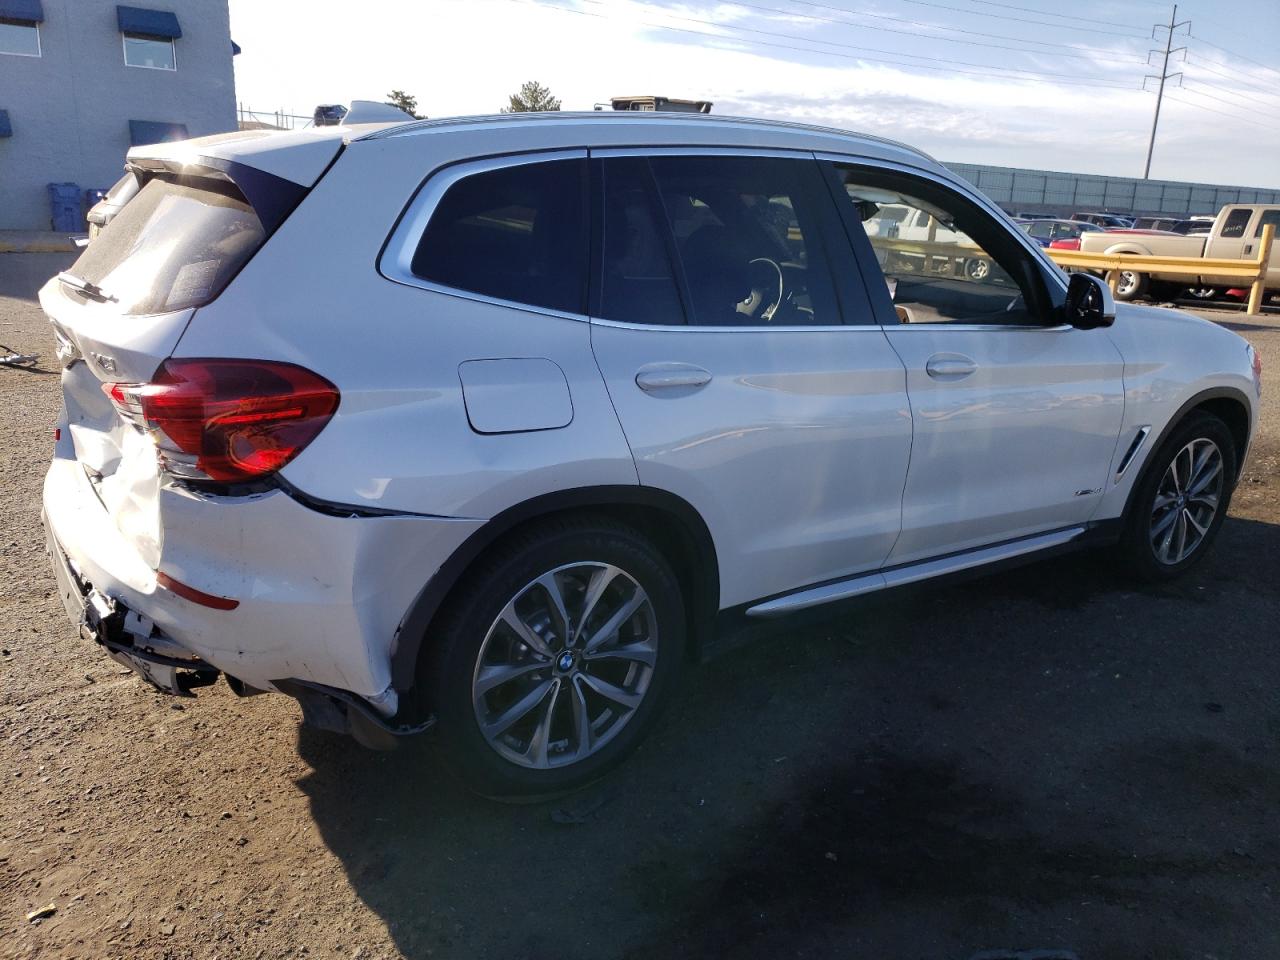 Buy 2018 BMW X3 Xdrive3 2.0L 5UXTR9C5XJL****** from USA Auctions 